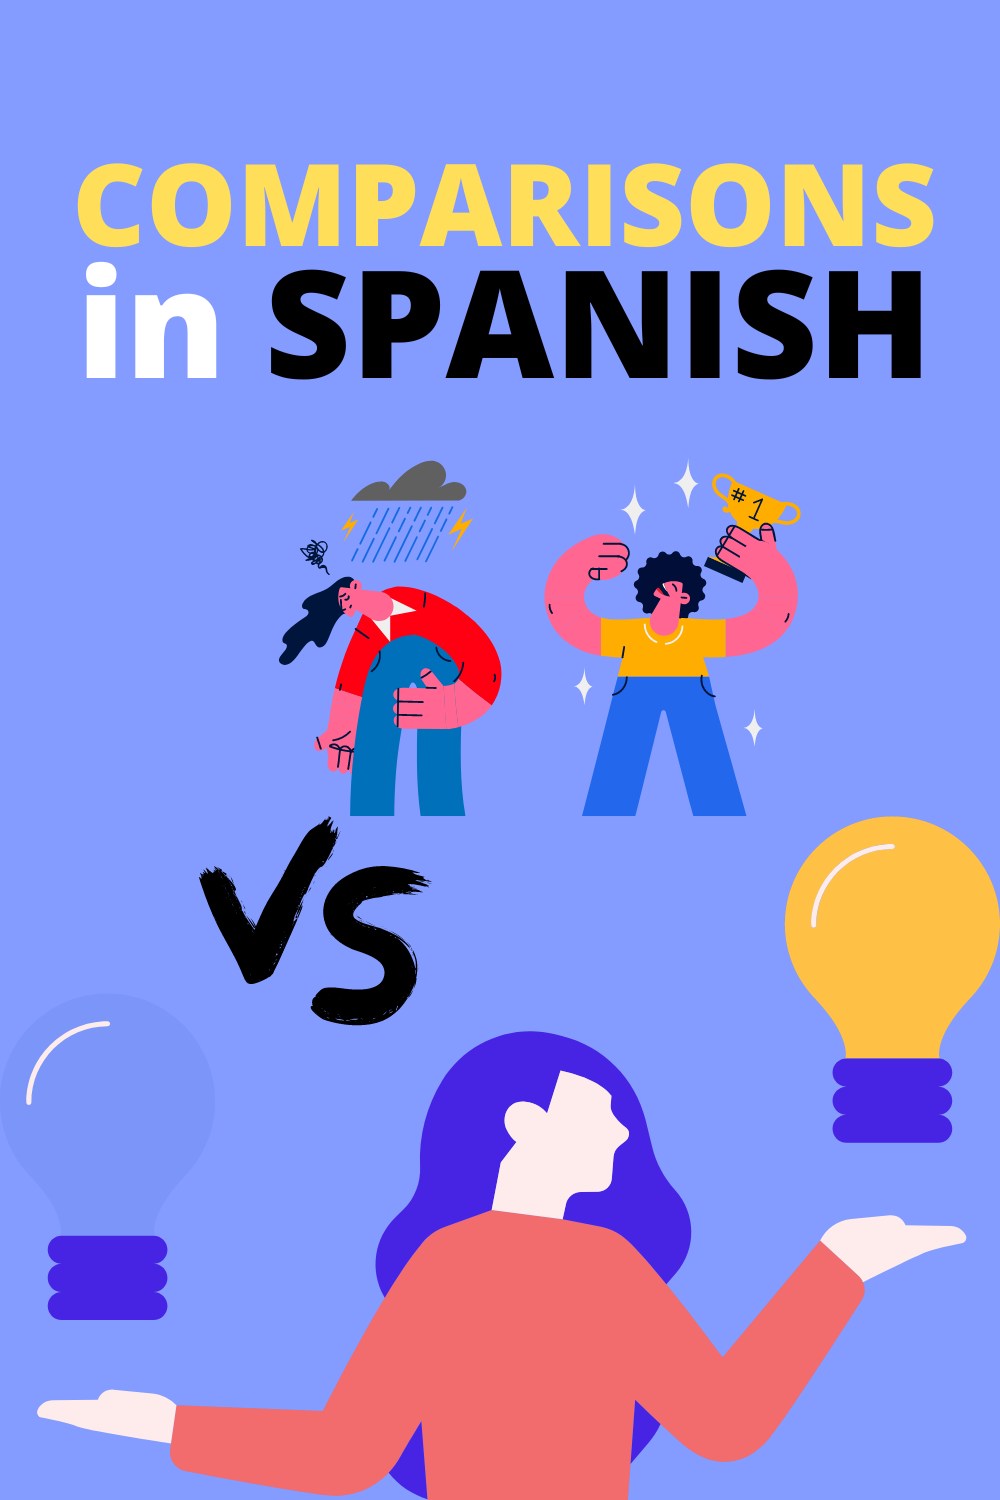 A lesson on comparisons in the spanish language